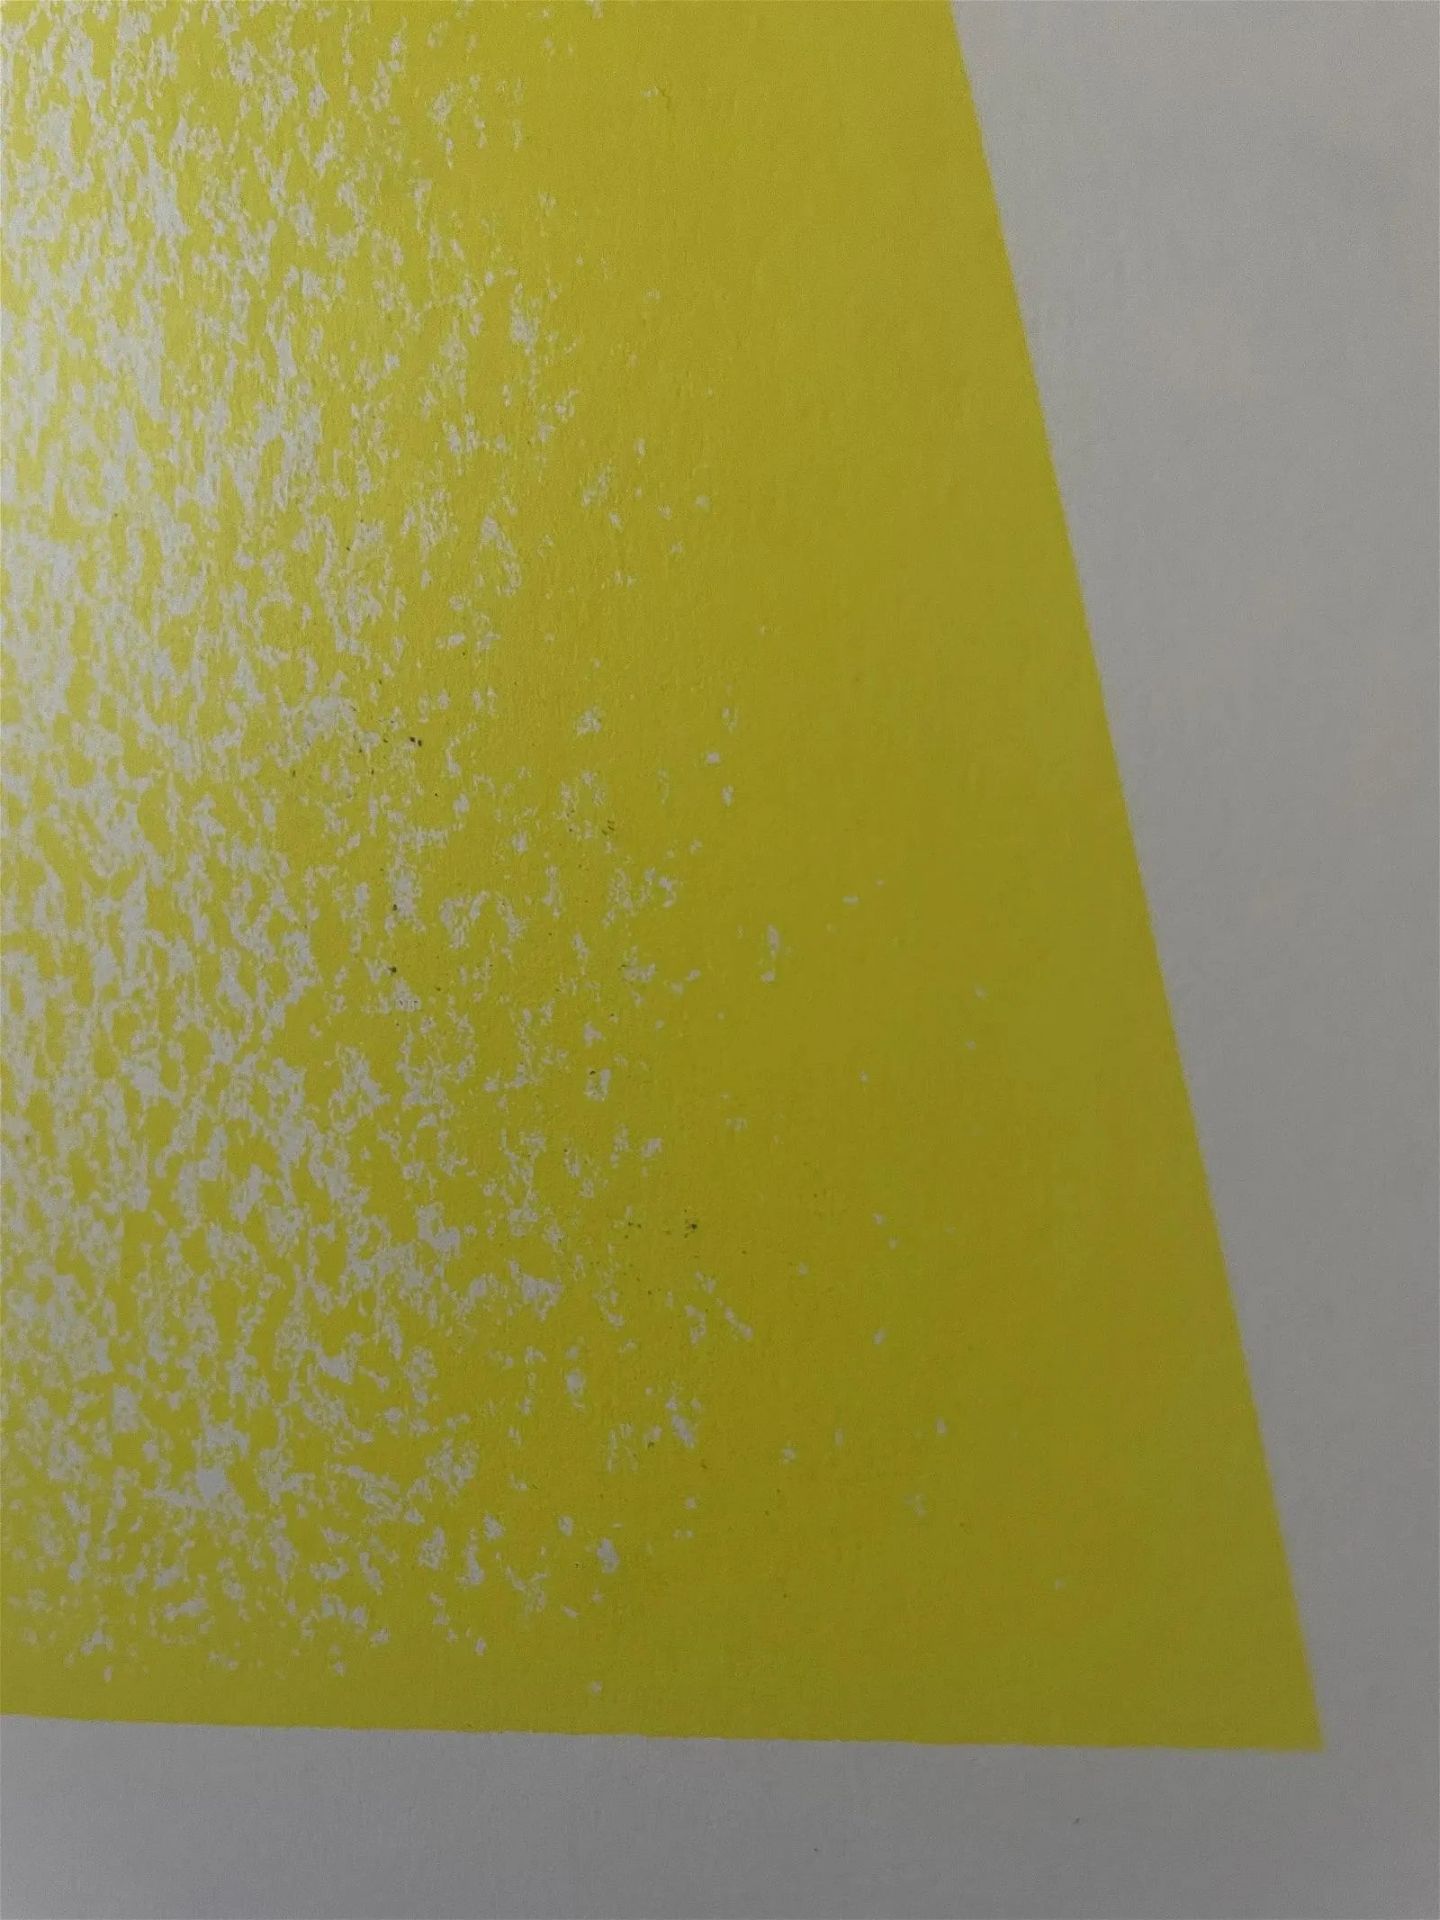 Richard Anuszkiewicz "Yellow Reversed, 1970" Offset Lithograph, Plate Signed, Dated - Image 6 of 6